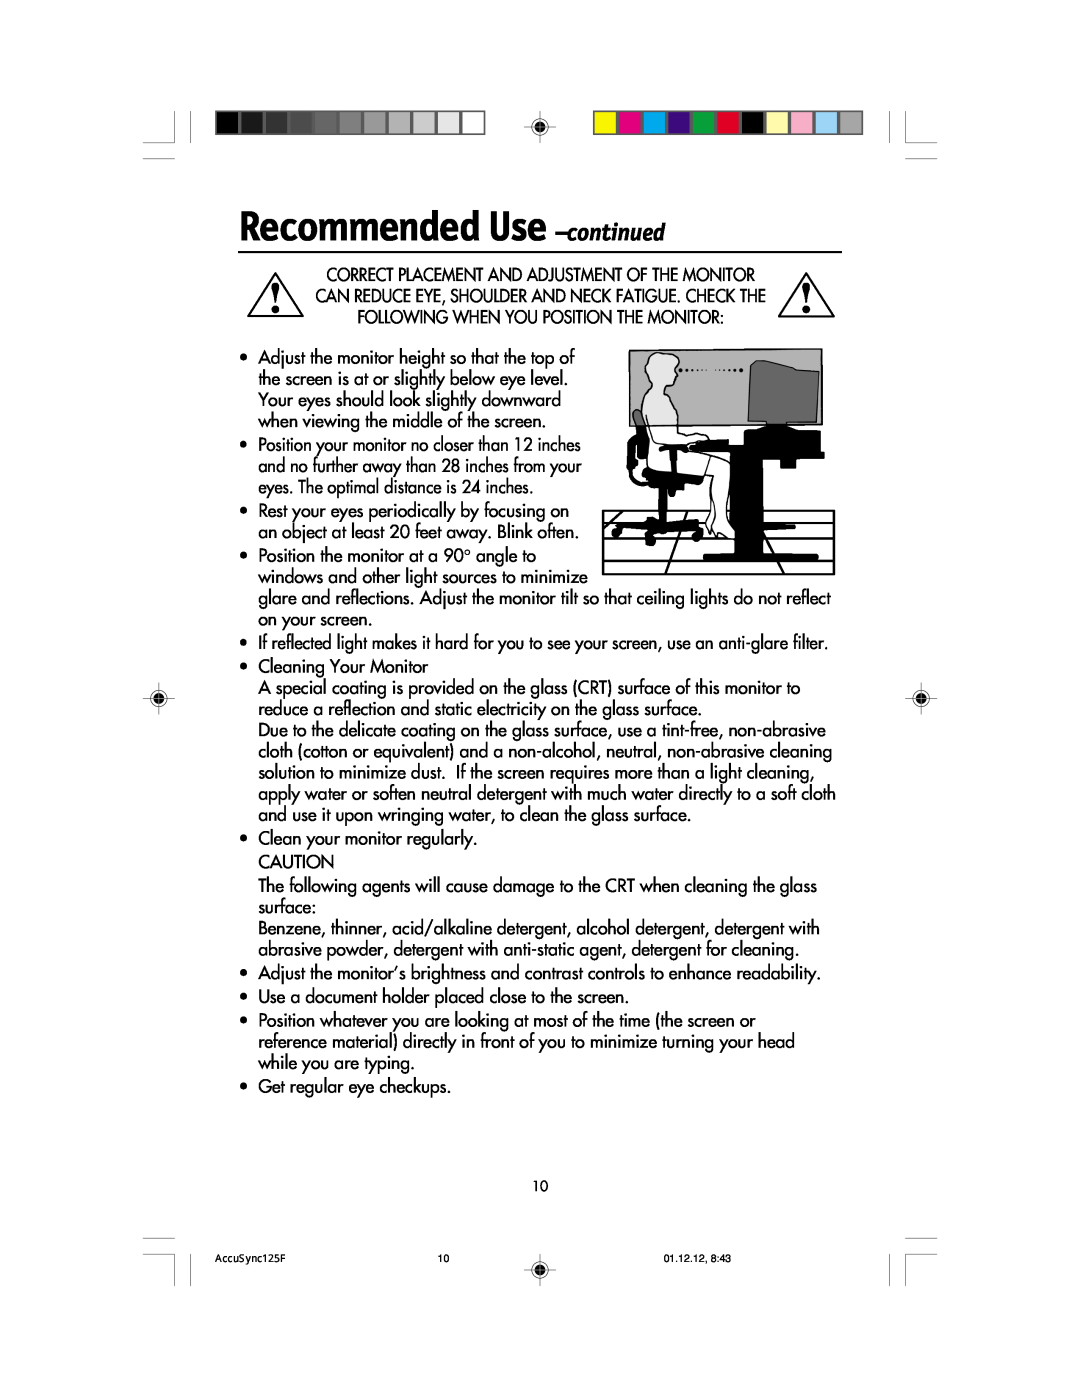 NEC 125F user manual Recommended Use -continued 